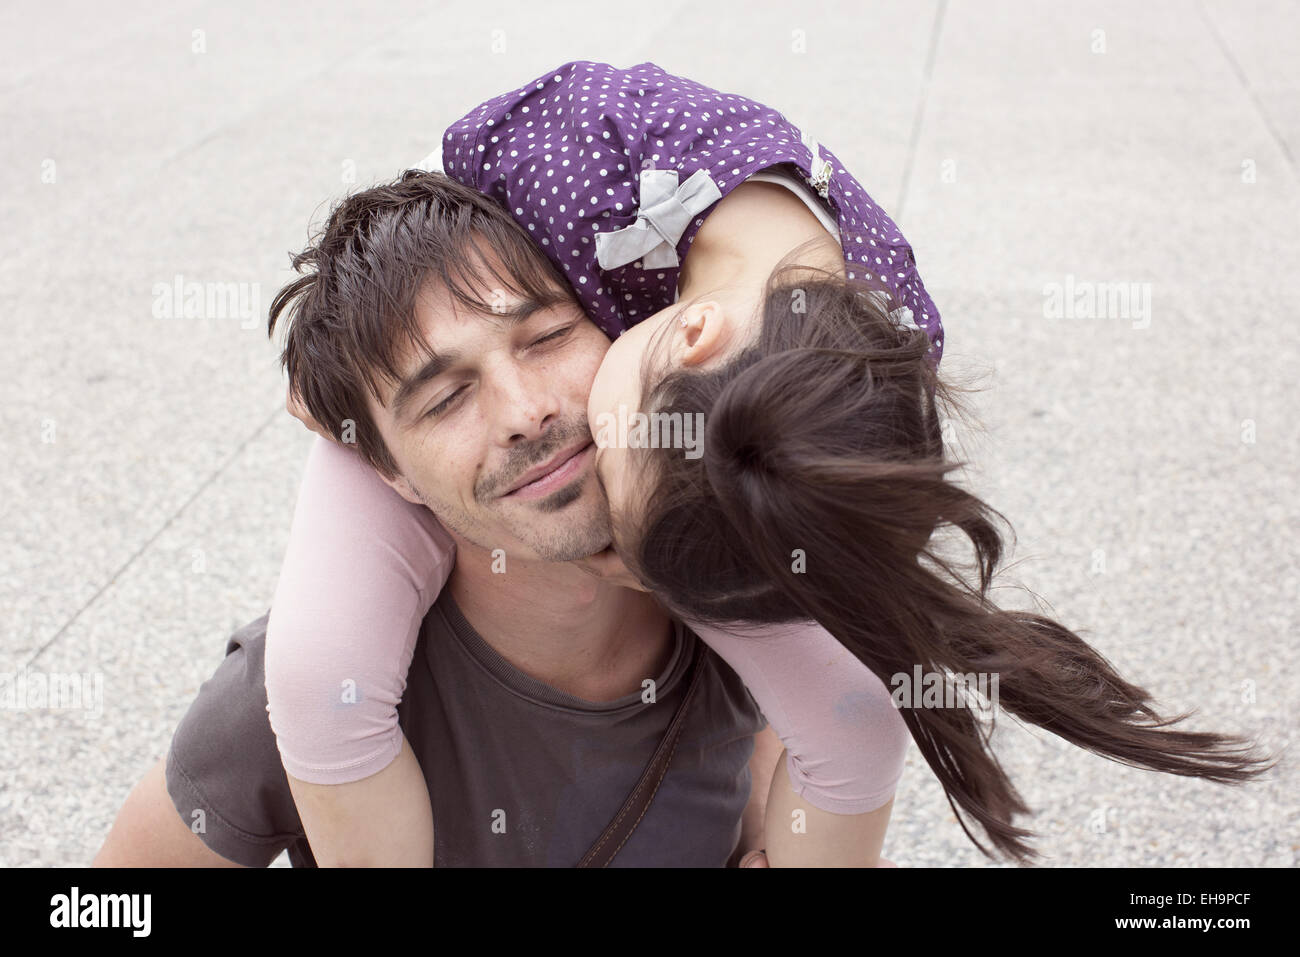 Little girl riding on father's shoulders, kissing his cheek Stock Photo